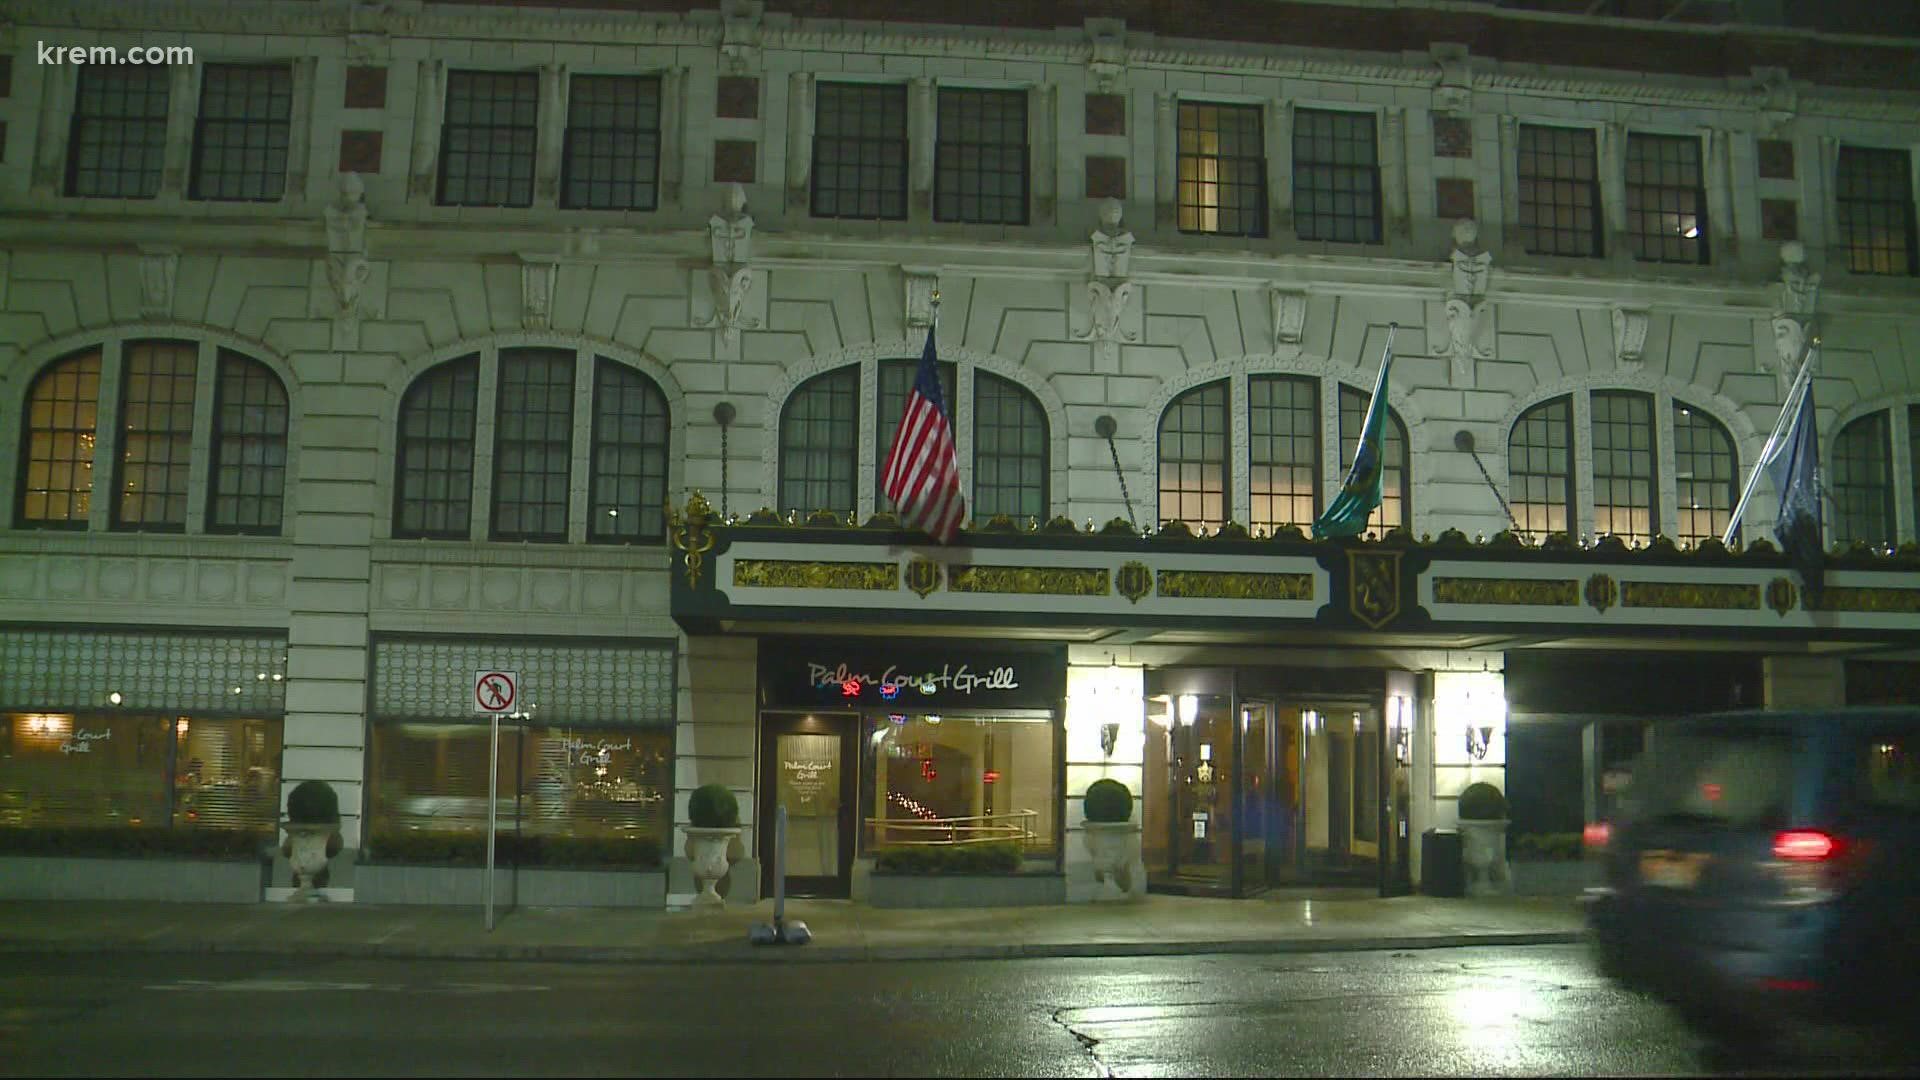 After two decades under the Worthy family's ownership, a new buyer purchased the Davenport Hotels in Spokane.